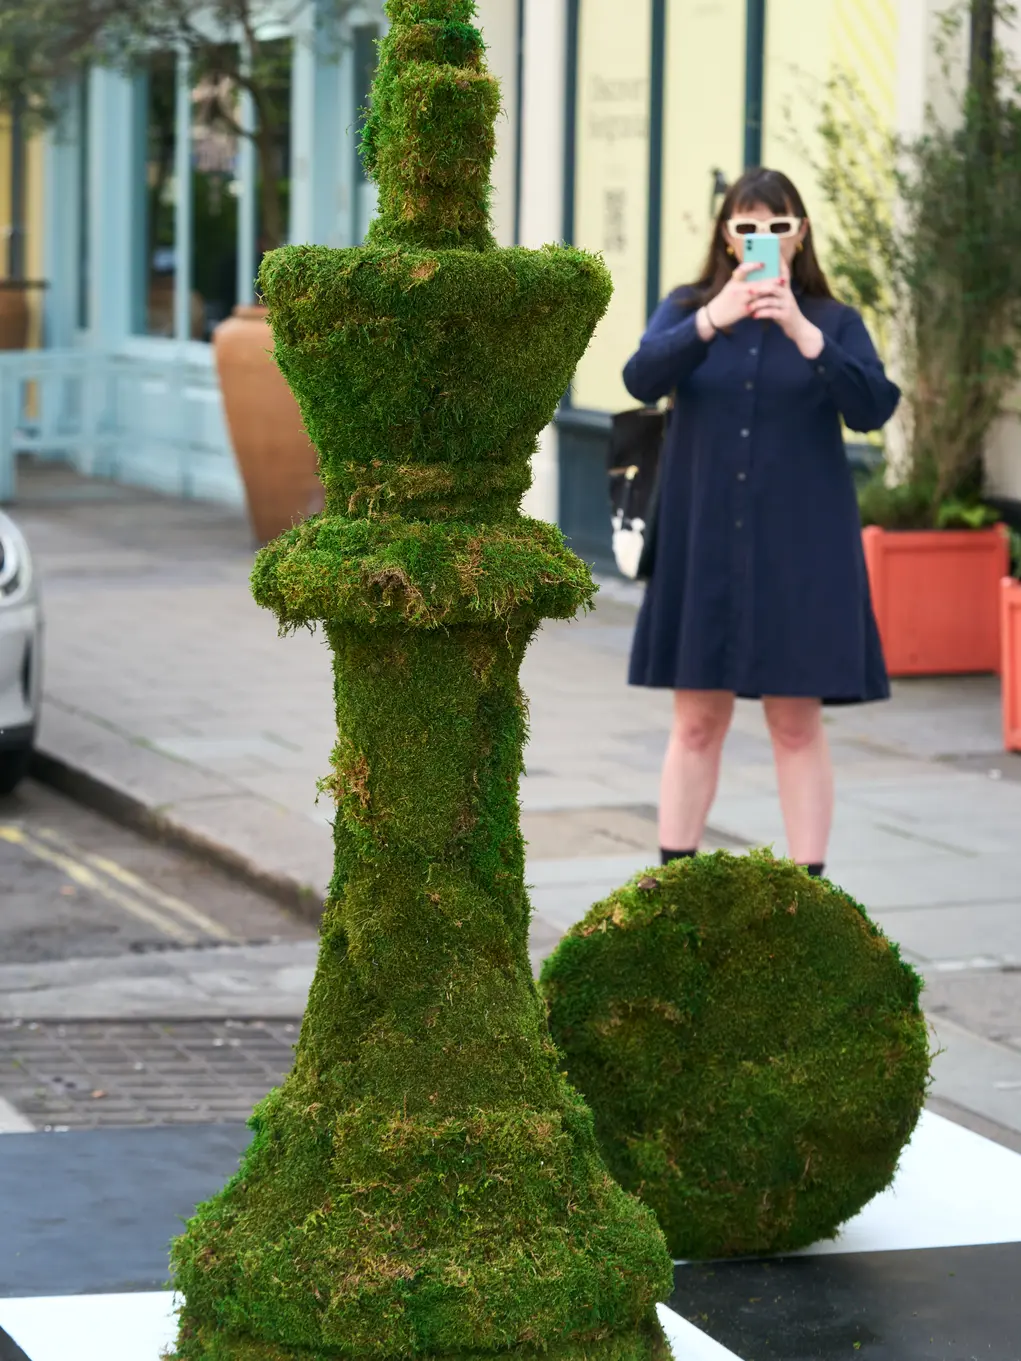 A woman takes a photos of a chess piece made of plants